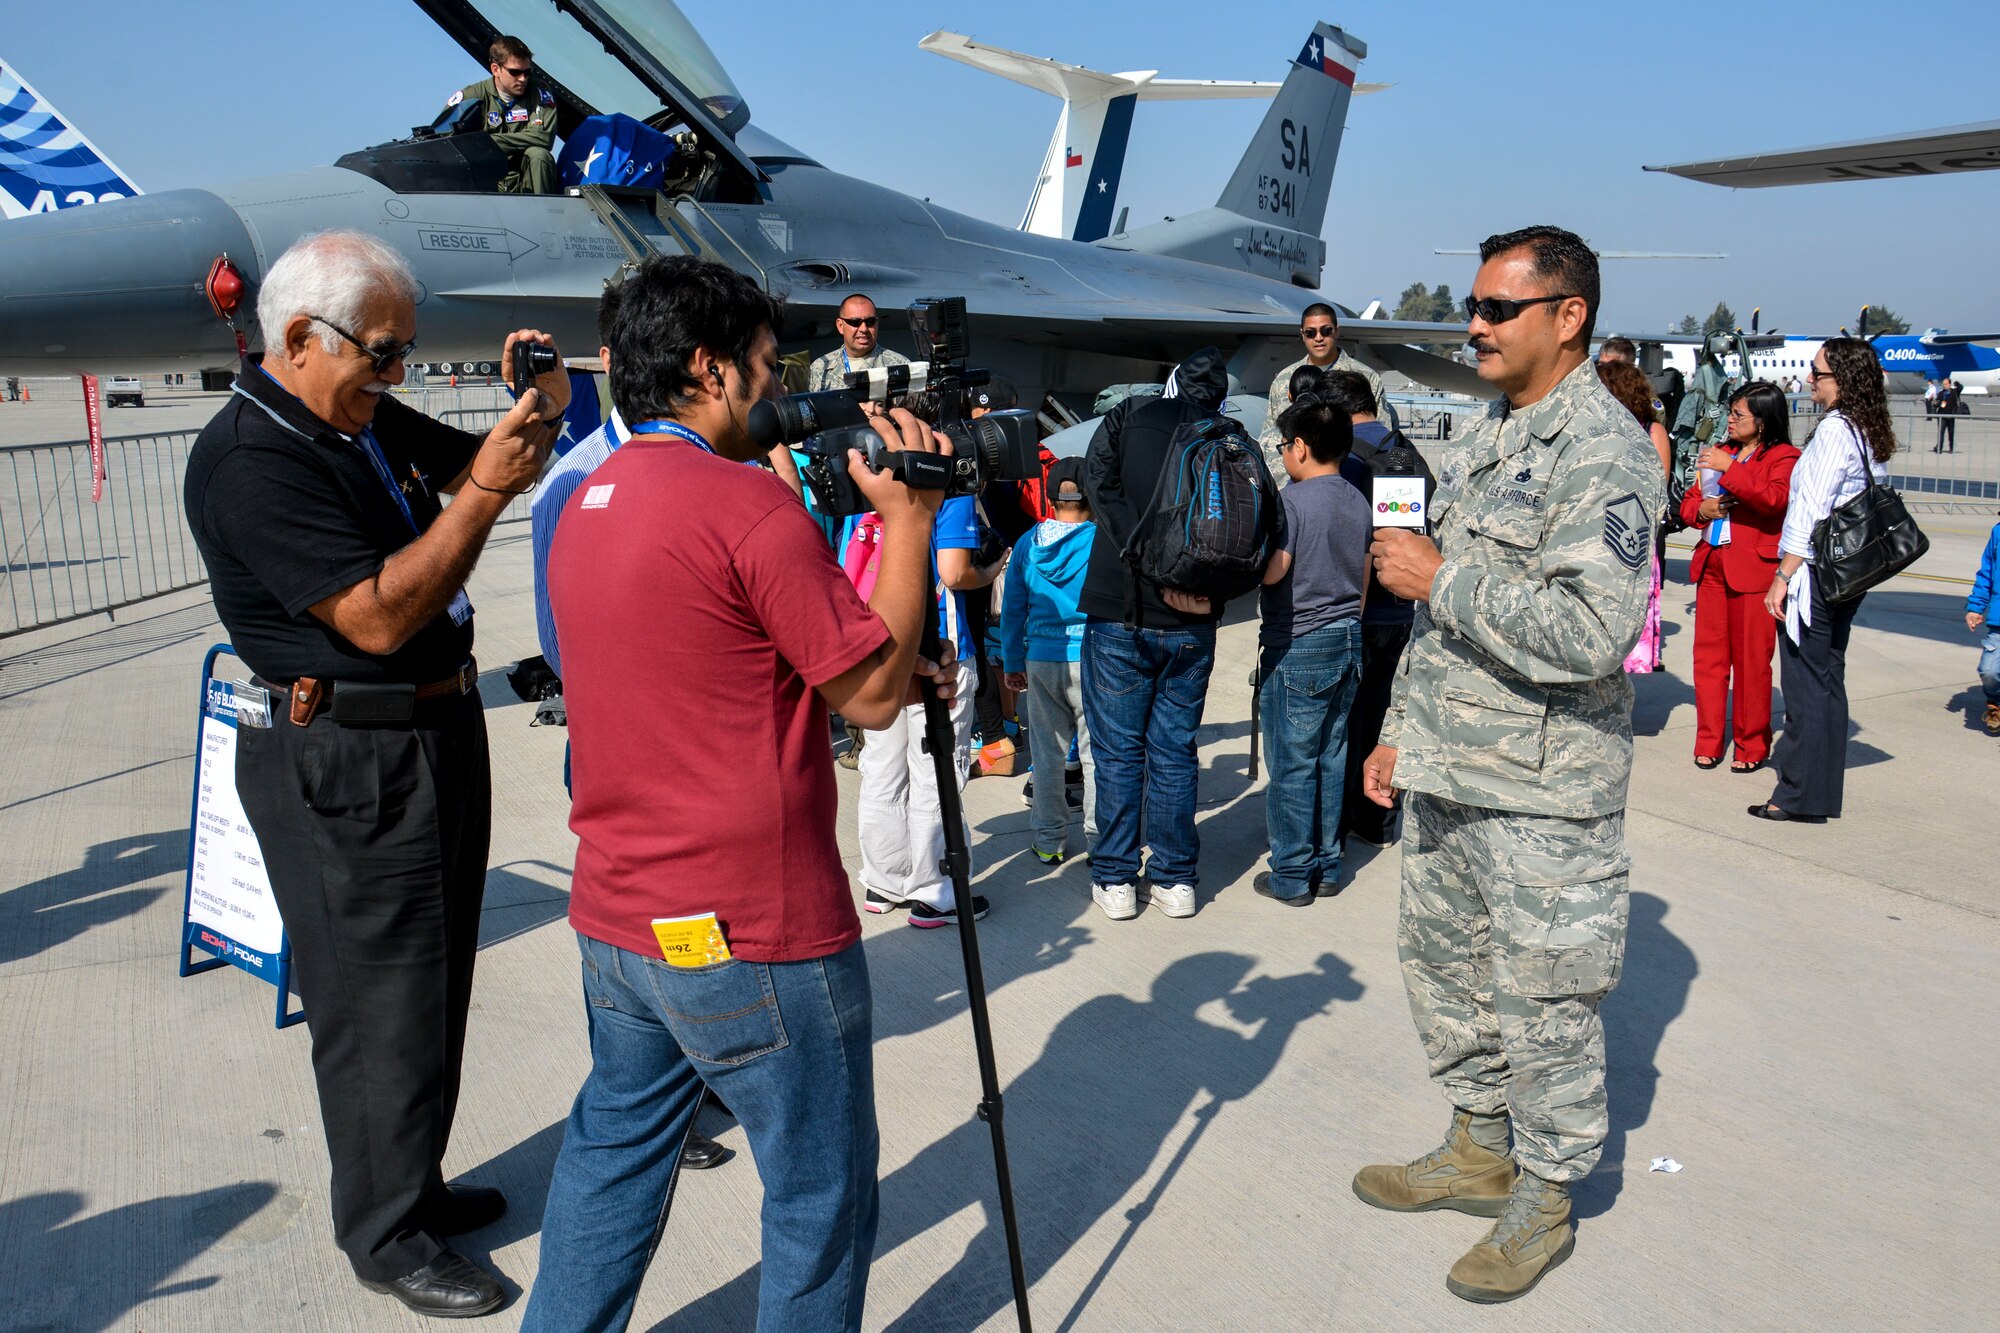 Master Sgt. Pablo Soriano, an aircraft maintenance specialist from the Texas Air National Guard, speaks with the media while children from the Make-A-Wish and Telet?n Foundations tour U.S. aircraft at the FIDAE Air Show in Santiago, Chile, March 26. Nearly 60 U.S. airmen are participating in subject matter expert exchanges with Chilean air force counterparts during FIDAE, and as part of the events are hosting static displays of the C-130 Hercules and F-16 Fighting Falcon. Airmen from the Texas Air National Guard set aside time to host the children before the public days of FIDAE, which are scheduled for the weekend. (U.S. Air Force photo by Capt. Justin Brockhoff/Released)